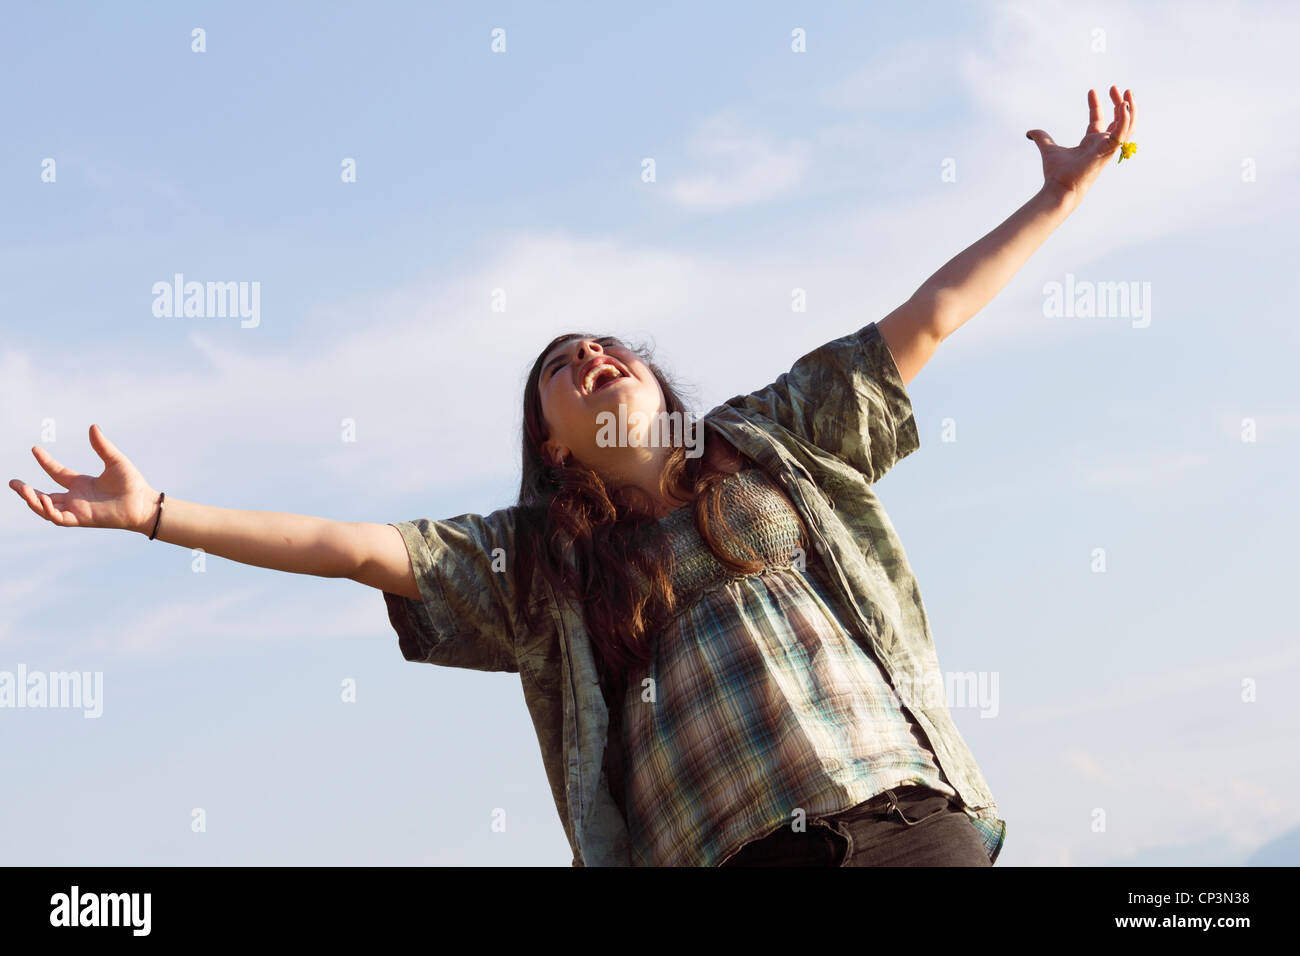 Cry out for joy - young teenage girl with raised arms feeling free. Sunny summer outdoor shot against a blue sky. Stock Photo